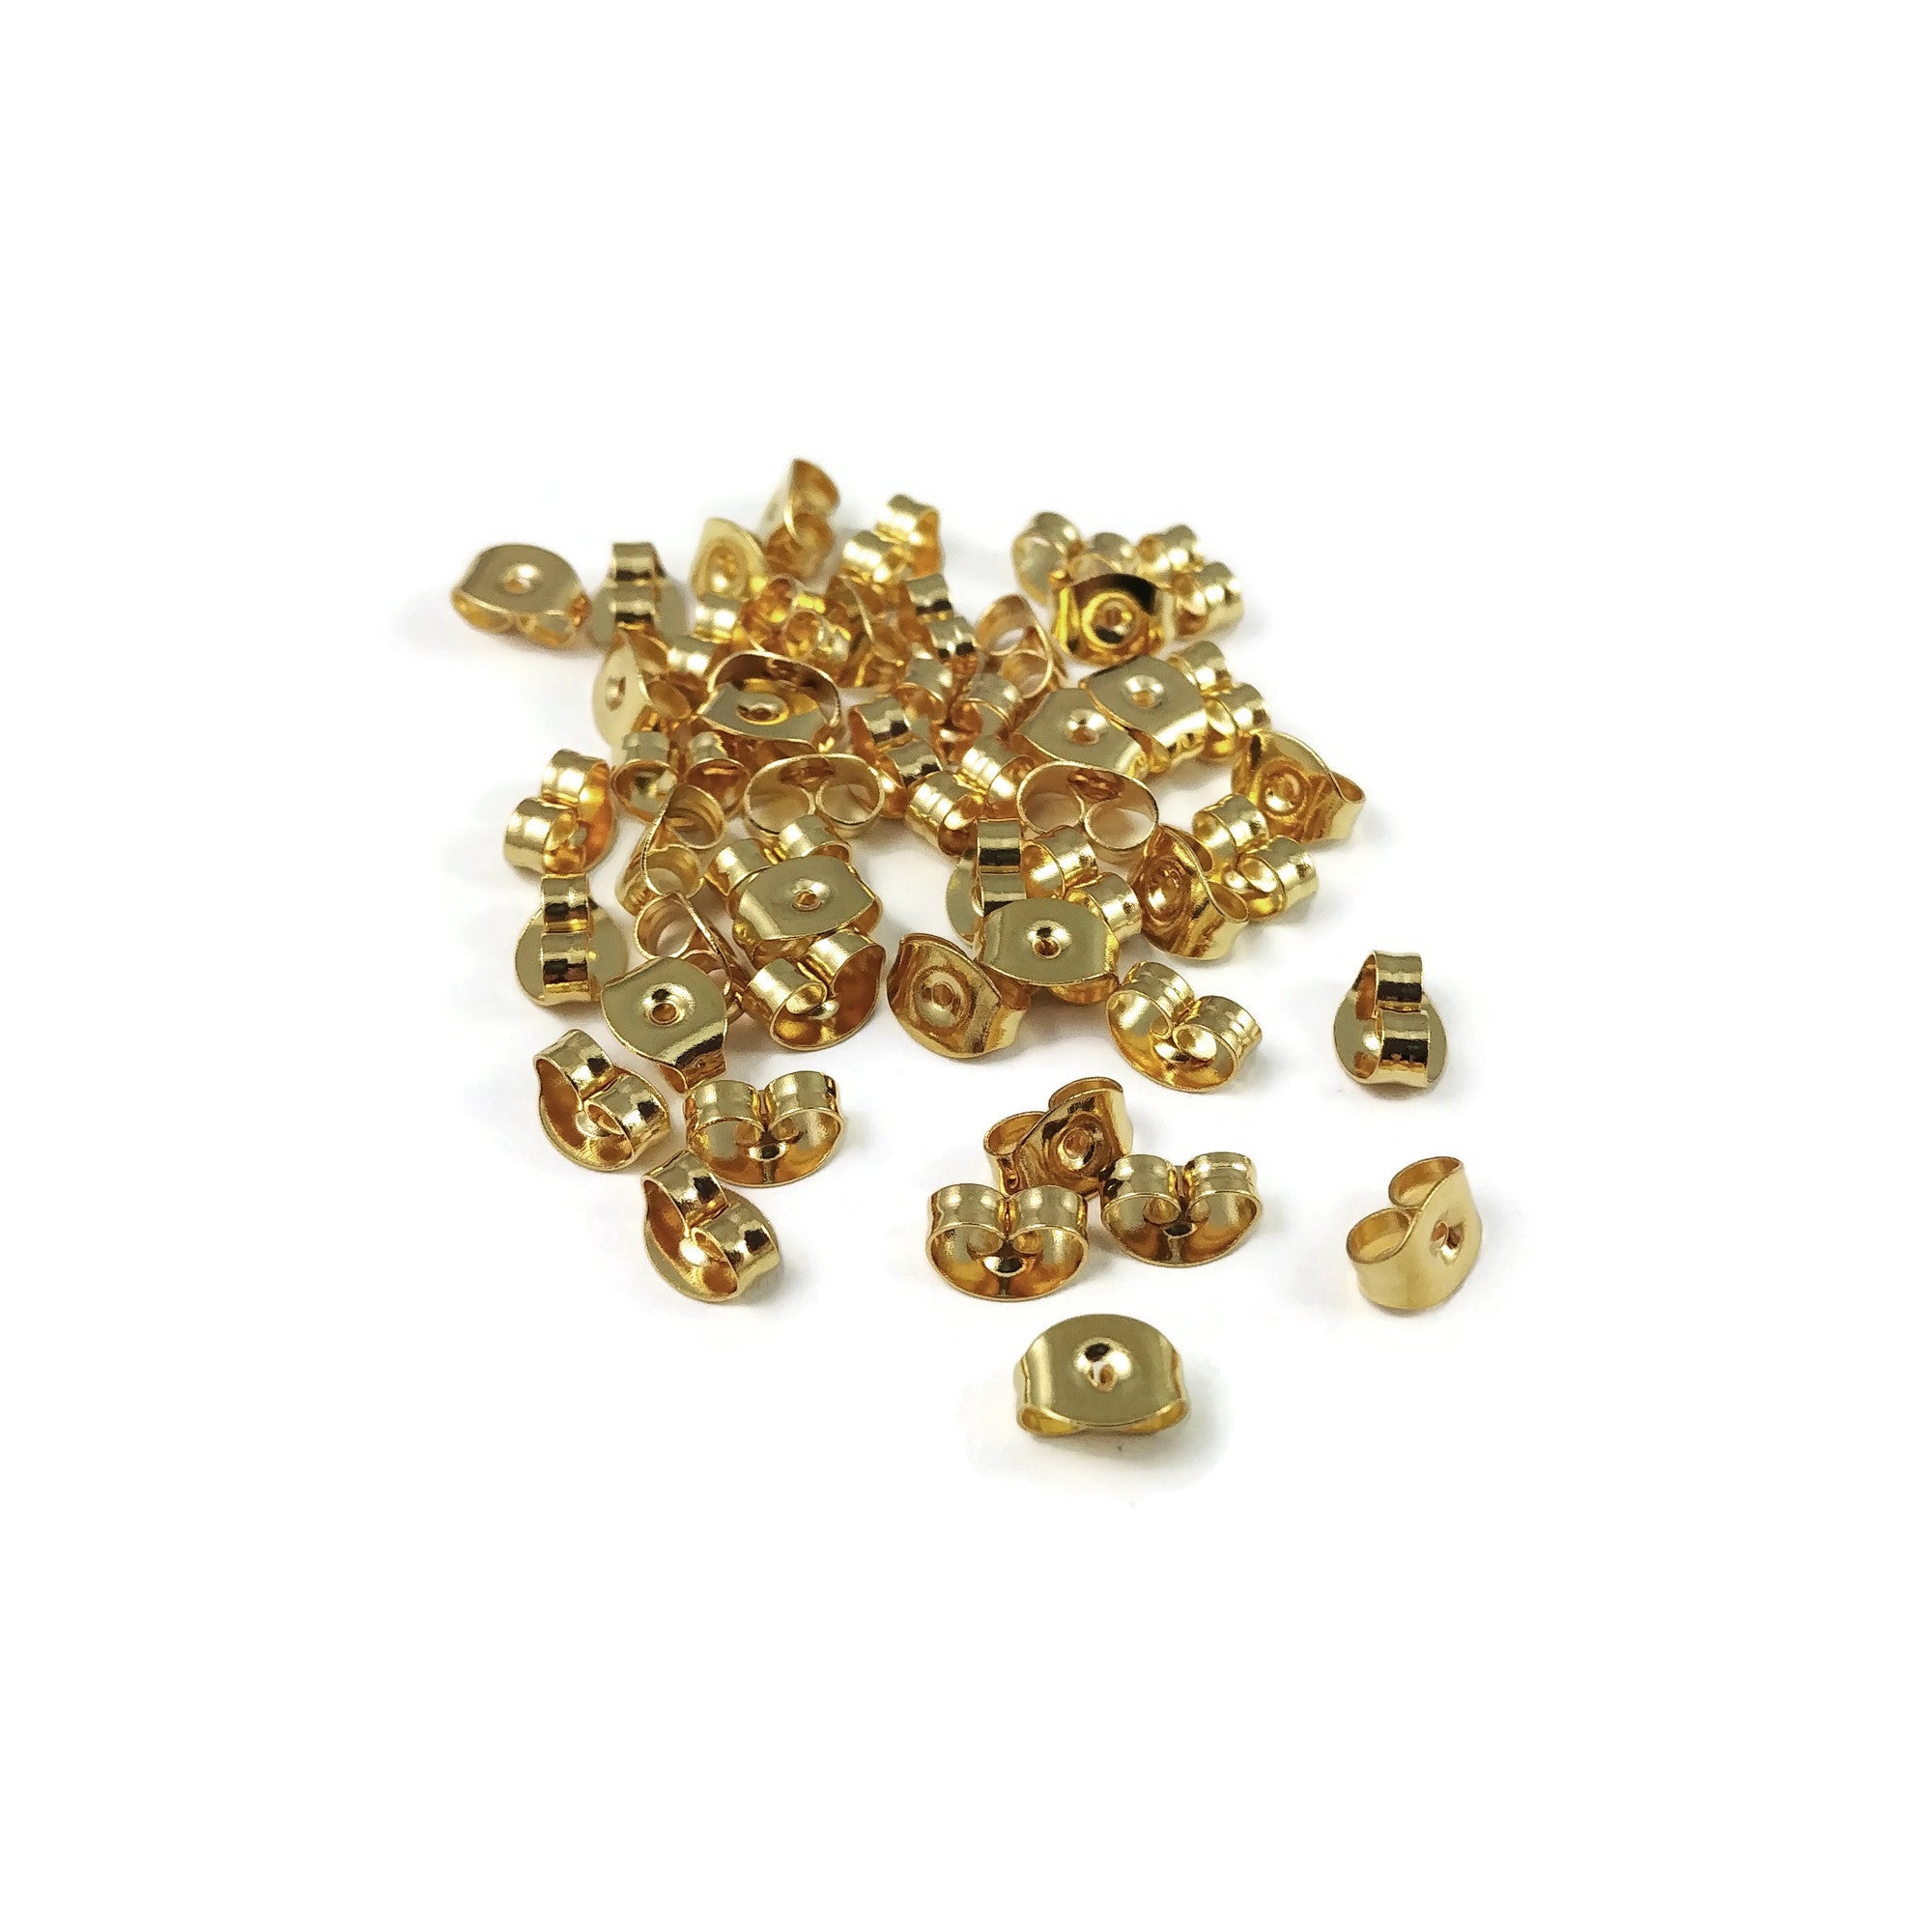 24K gold plated earring post, 6mm stainless steel flat pad studs